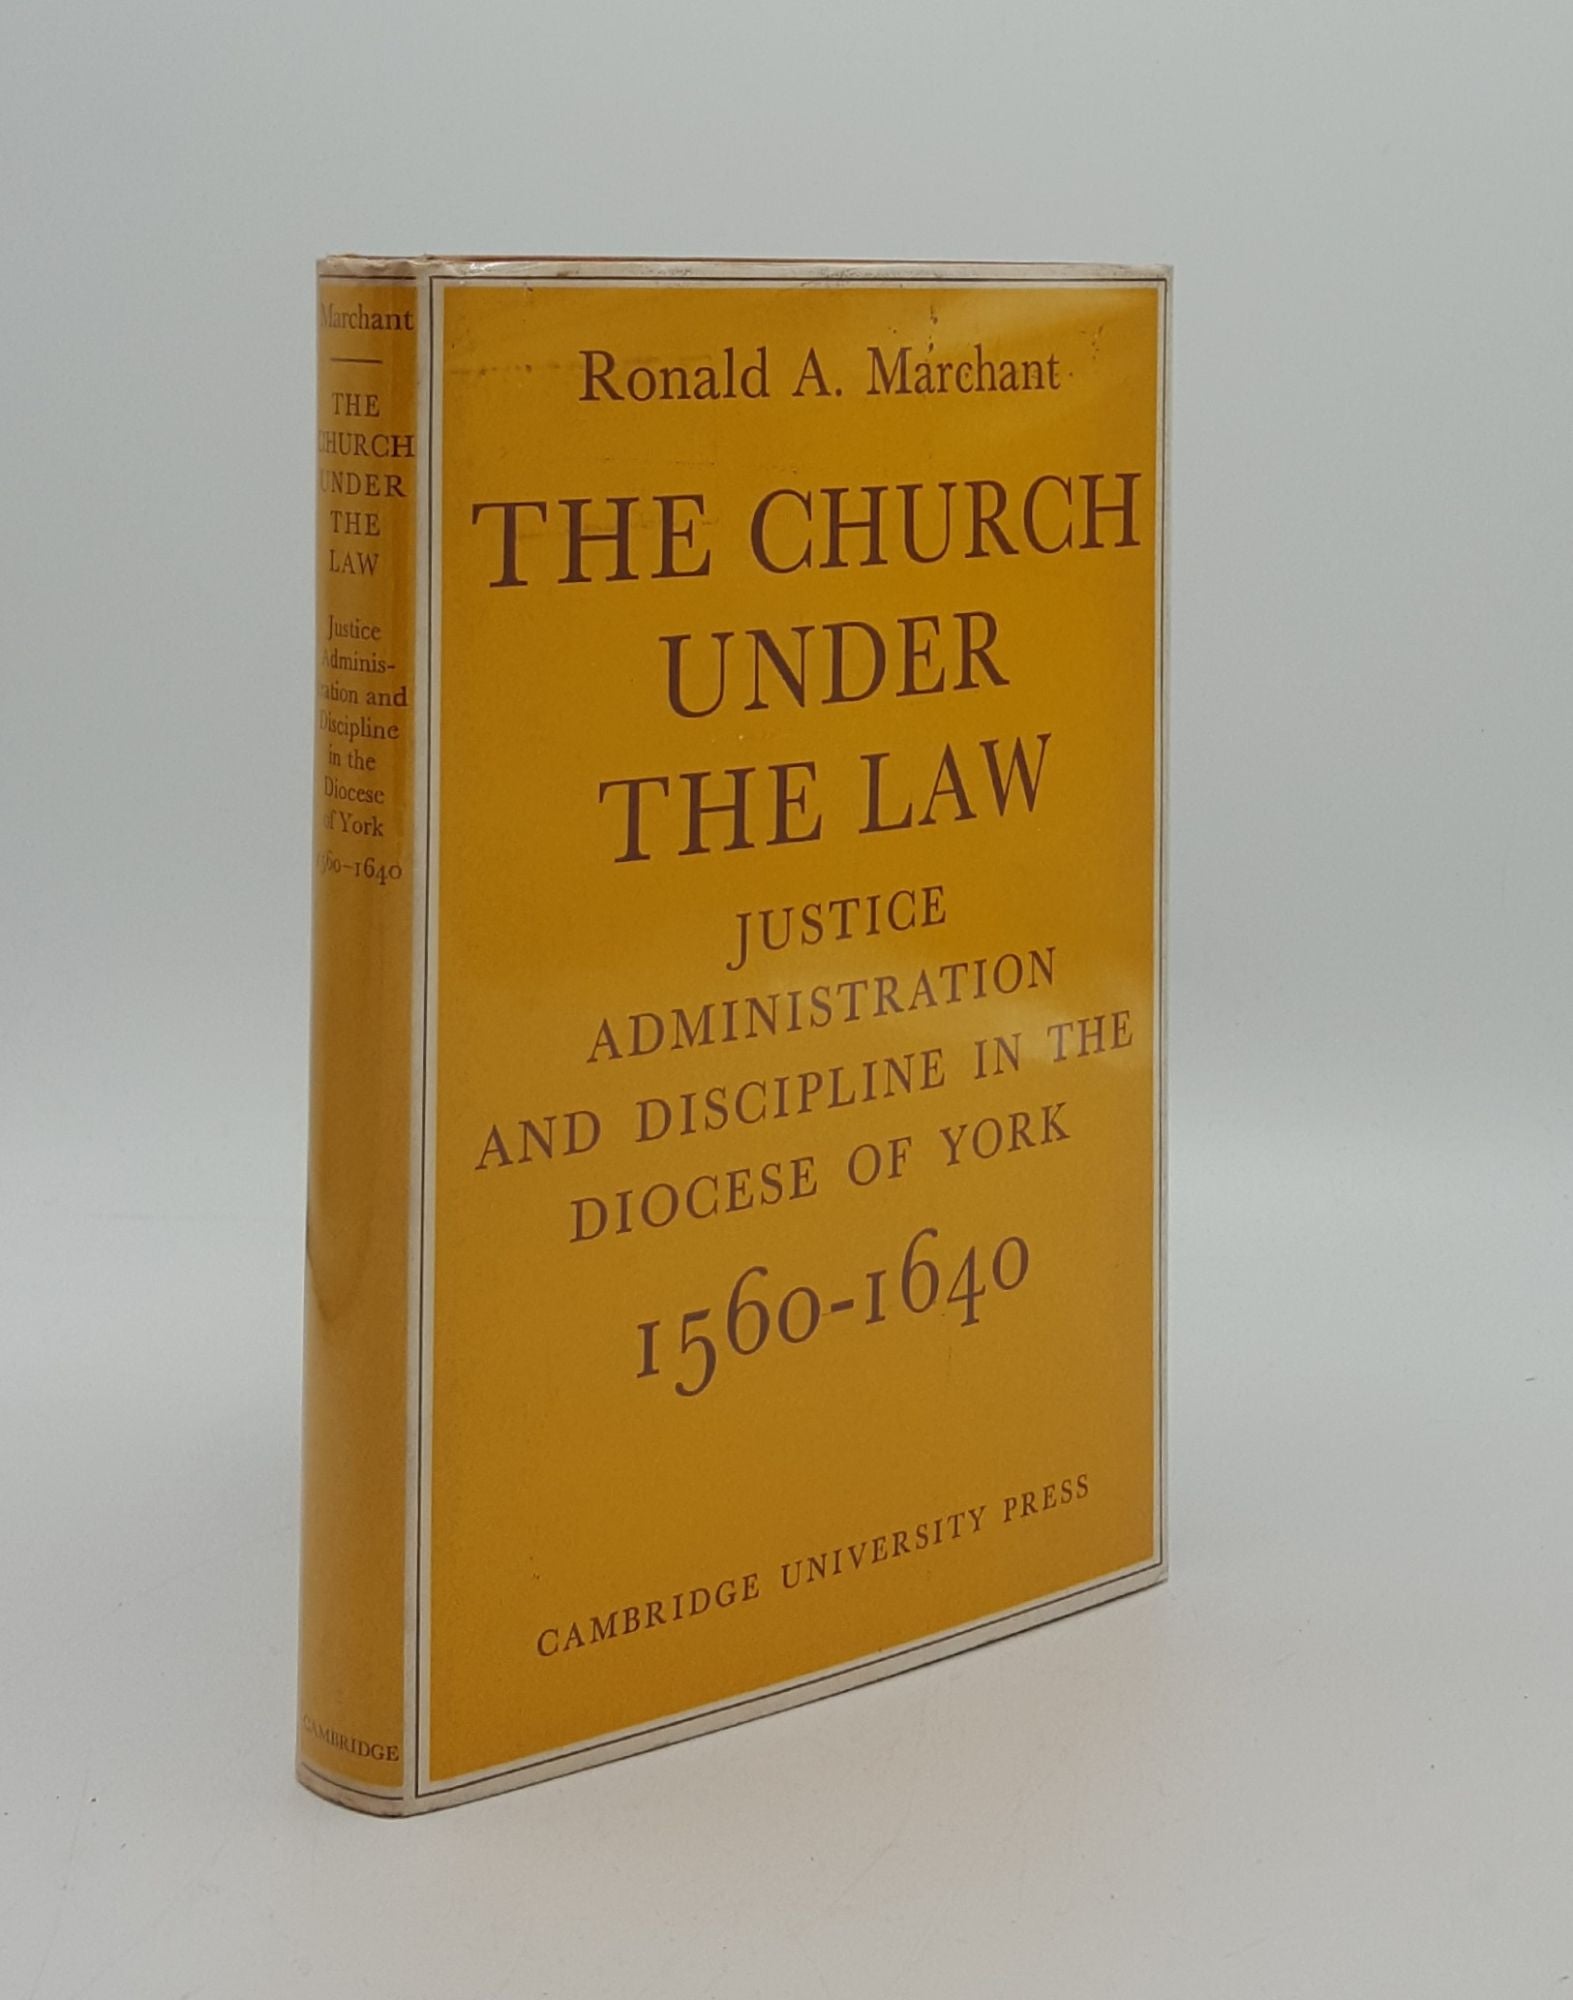 MARCHANT Ronald A. - The Church Under the Law Justice Administration and Dicipline in the Diocese of York 1560-1640